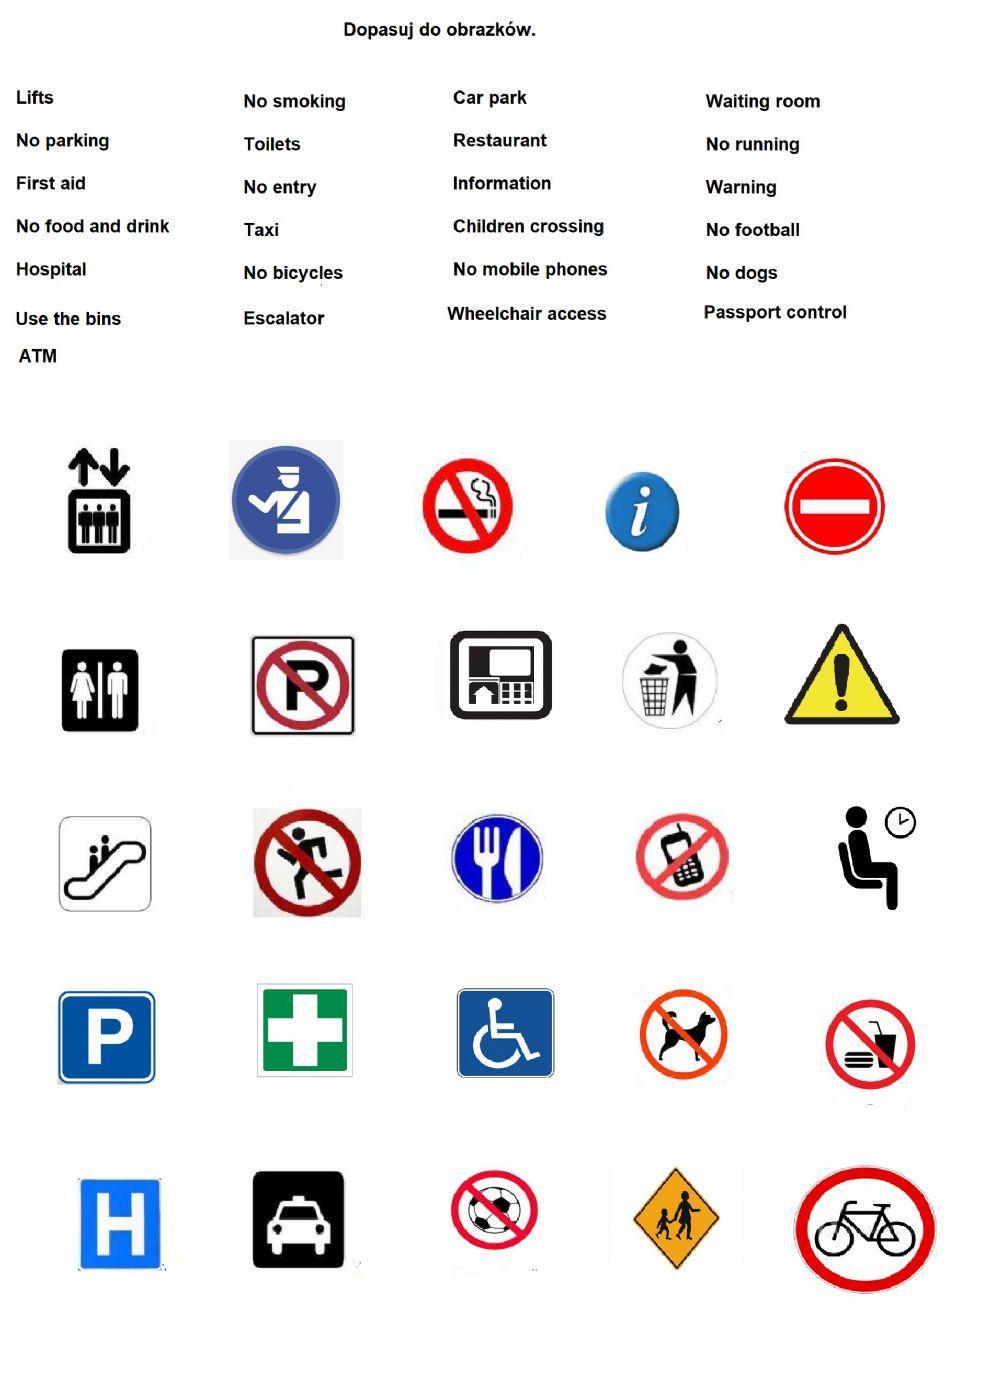 Signs and symbols